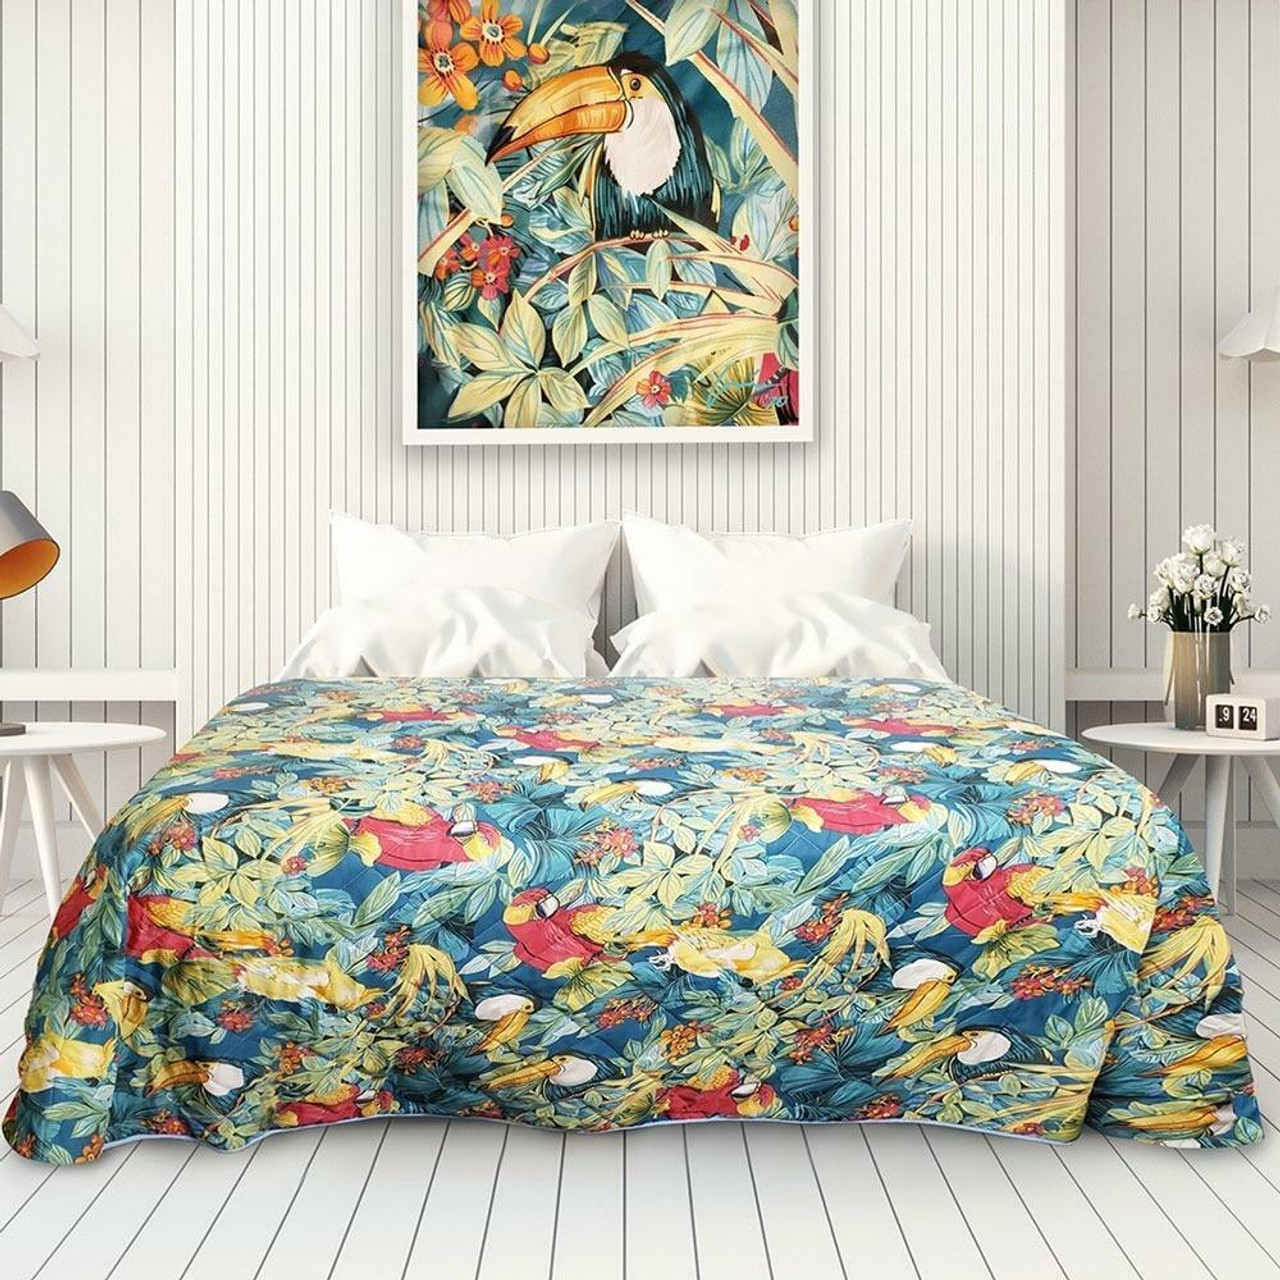 Oxford Super Blend by Ganesh Mills OXFORD GANESH or PRINTED BEDSPREADS or PARADISE TEQUILA SUNRISE or KING 118X120 52percent or COTTON 48percent or POLYESTER or 4 PER CASE